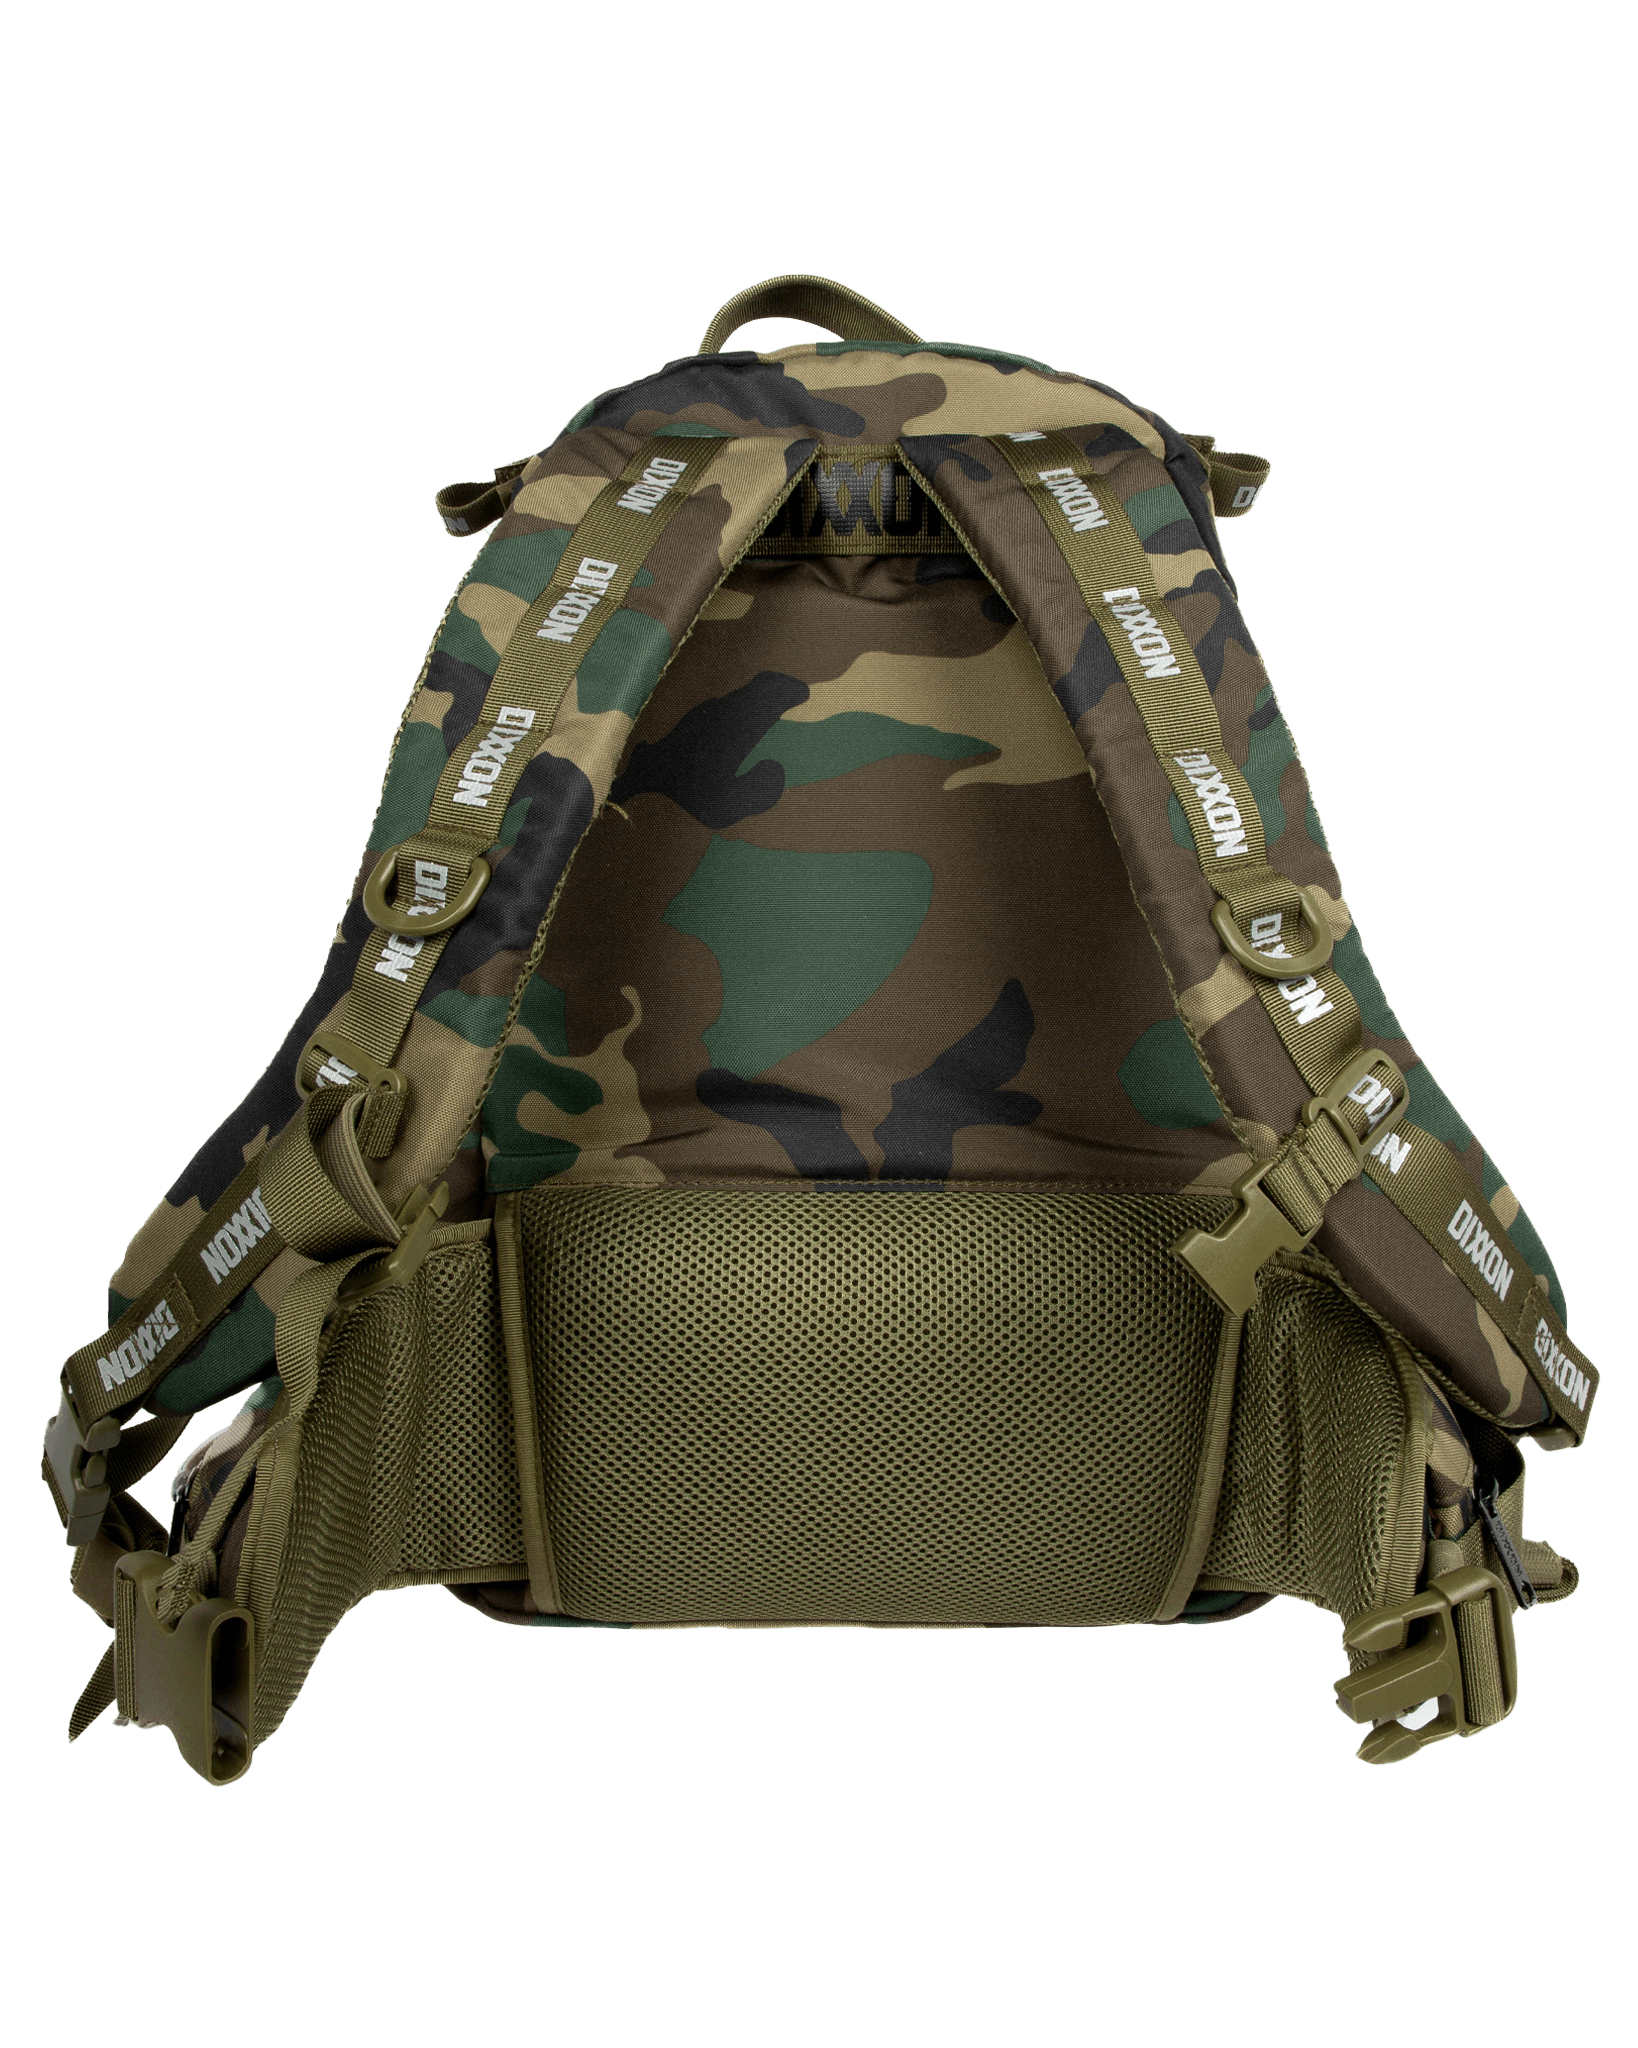 Camo Tactical Backpack - Dixxon Flannel Co.